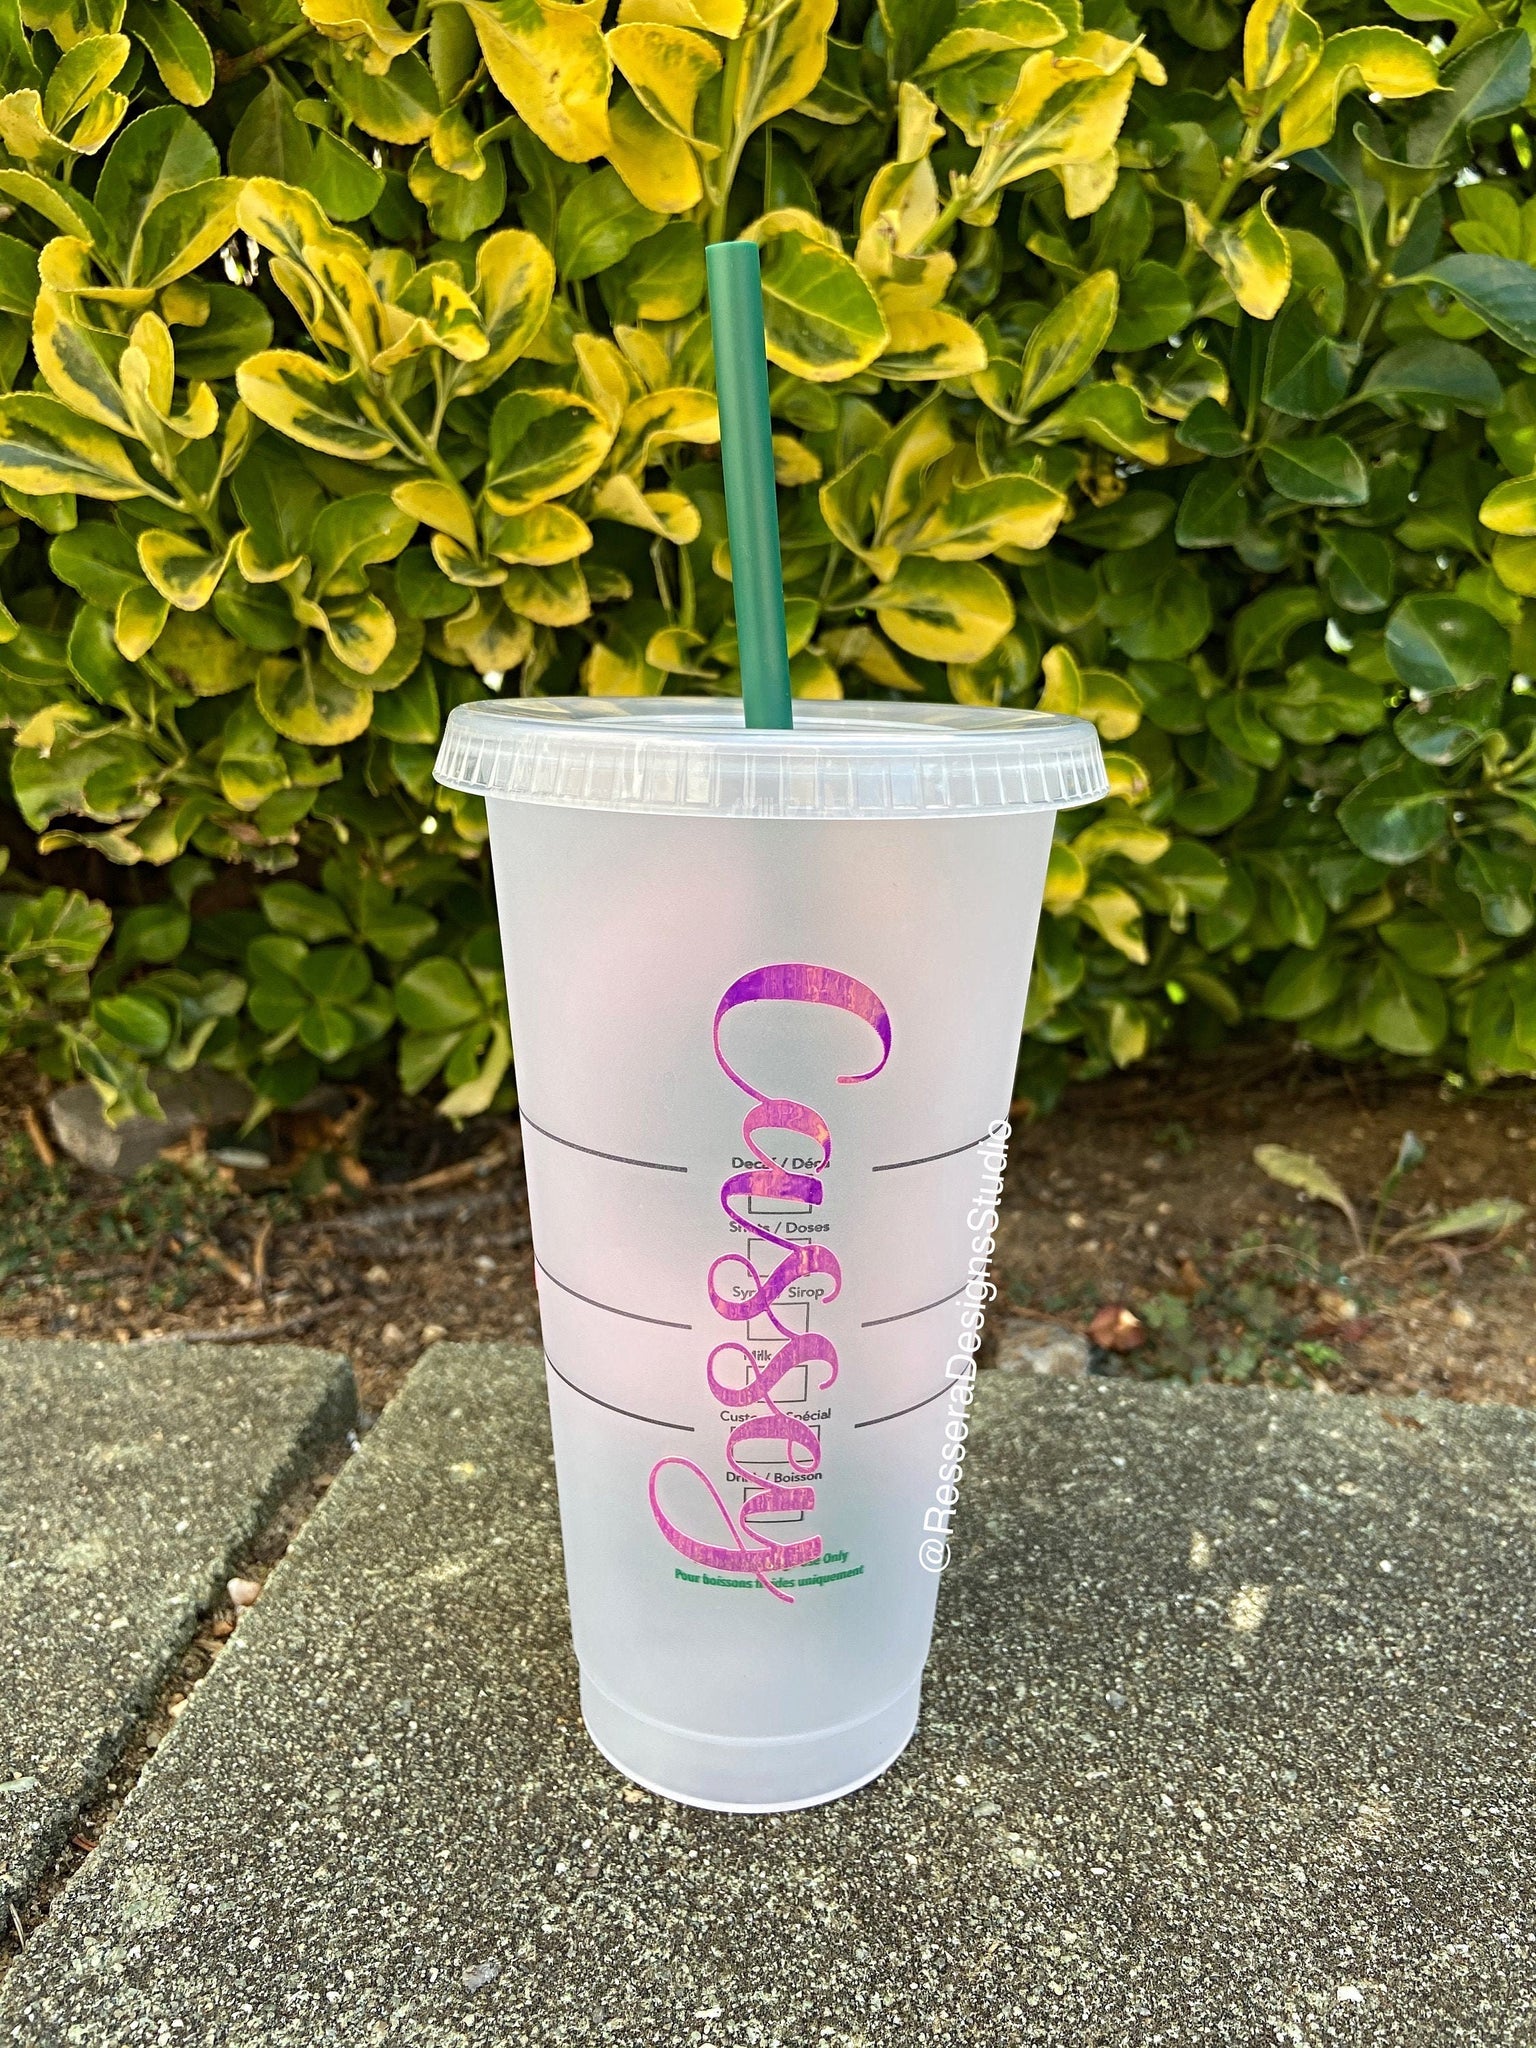 Butterfly Starbucks Cup Personalized Starbucks Cold Cup Birthday